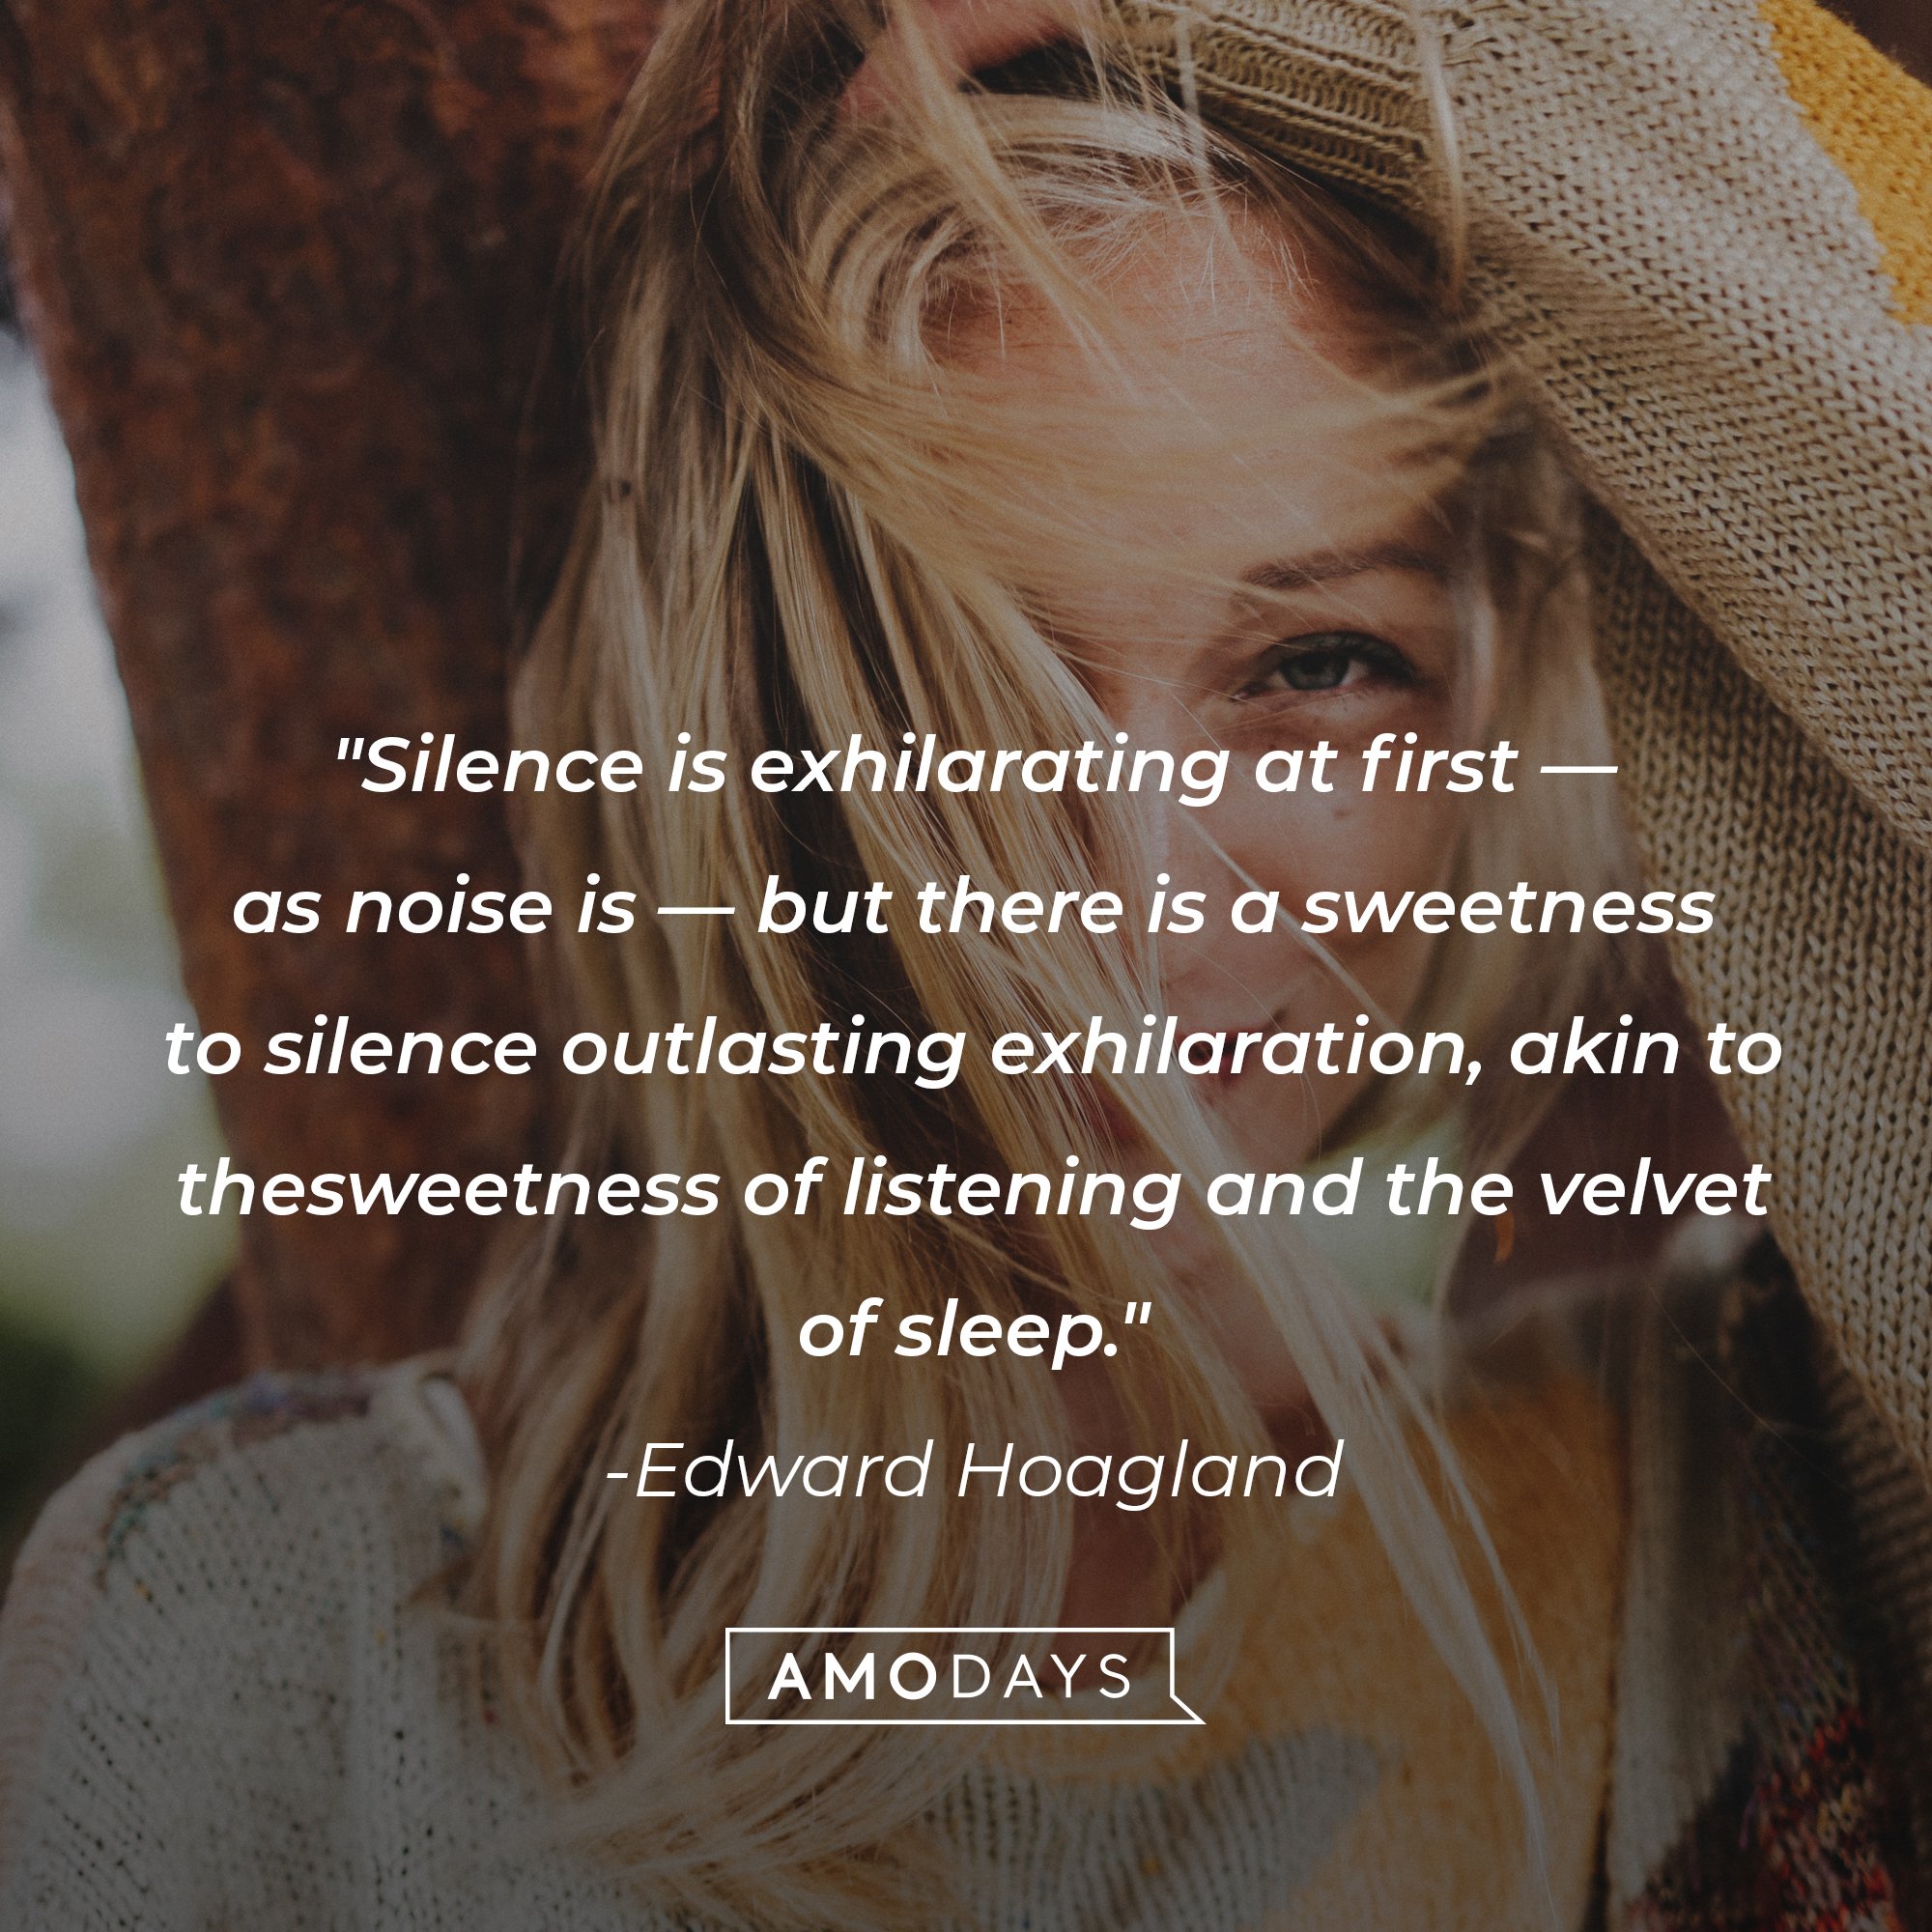 Edward Hoagland’s quote: "Silence is exhilarating at first—as noise is—but there is a sweetness to silence outlasting exhilaration, akin to the sweetness of listening and the velvet of sleep." | Image: AmoDays 